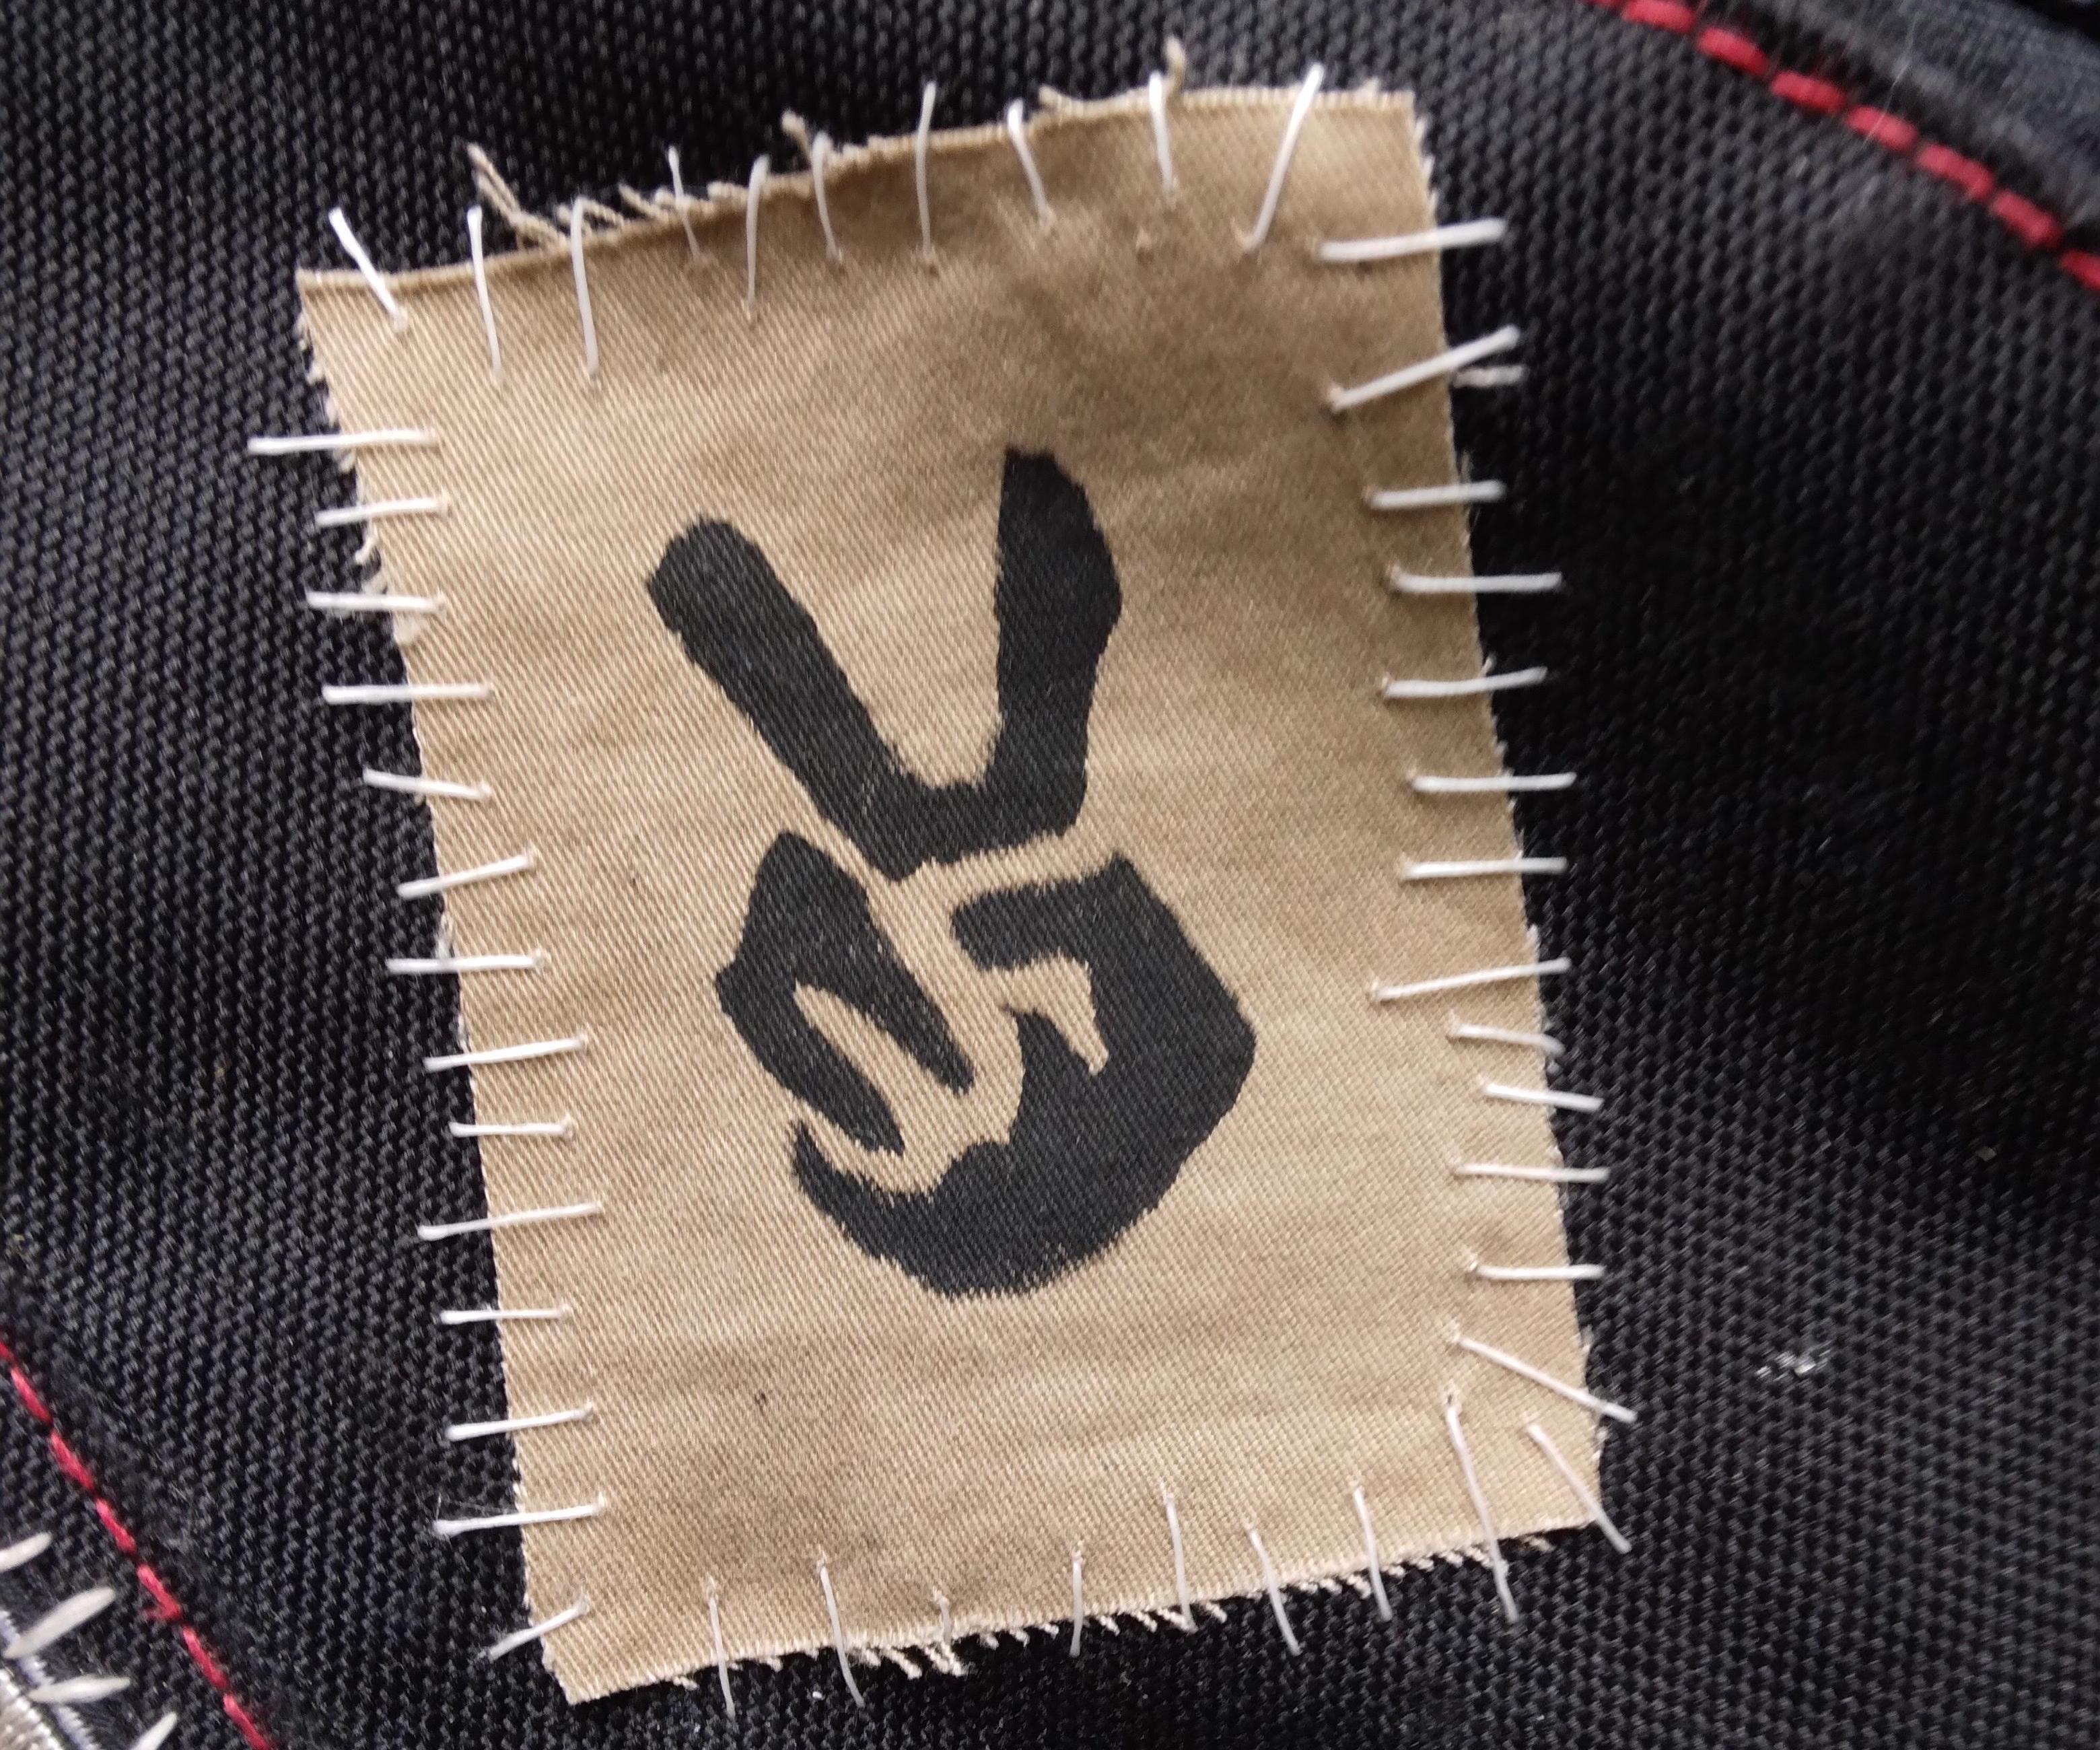 How to Make a Punk Rock Patch!!